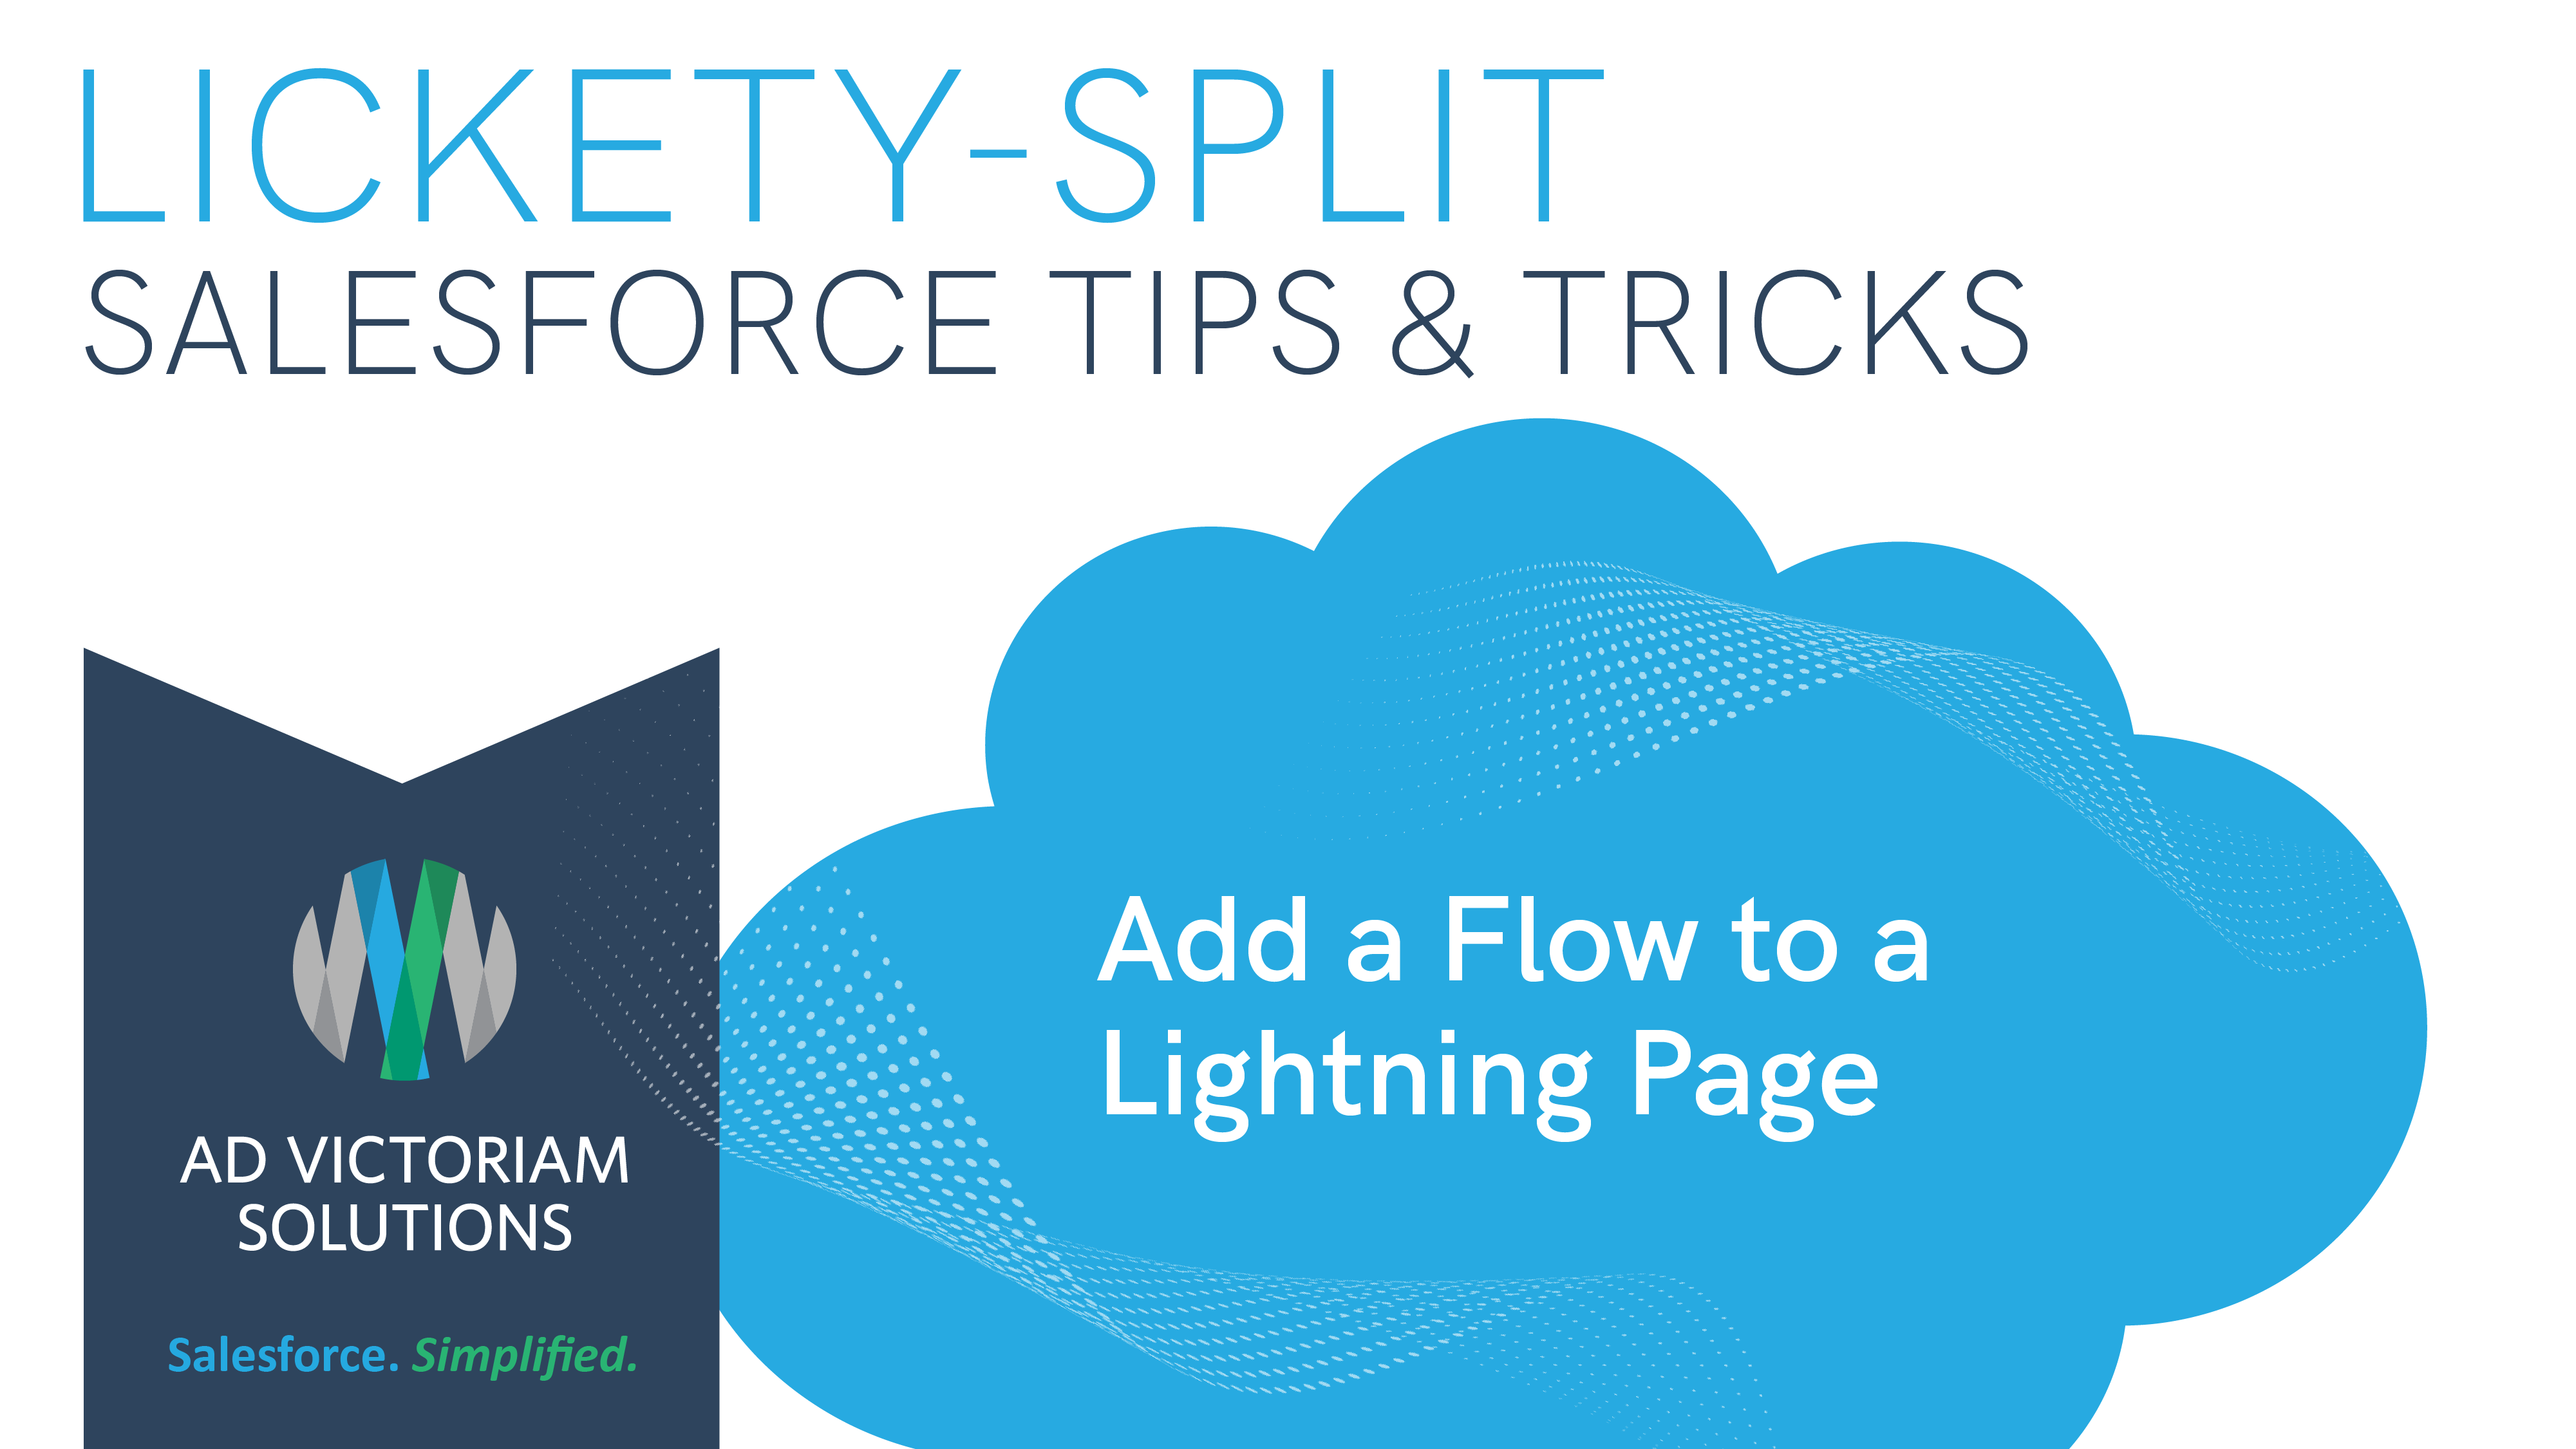 Add a Flow to a Lightning Page